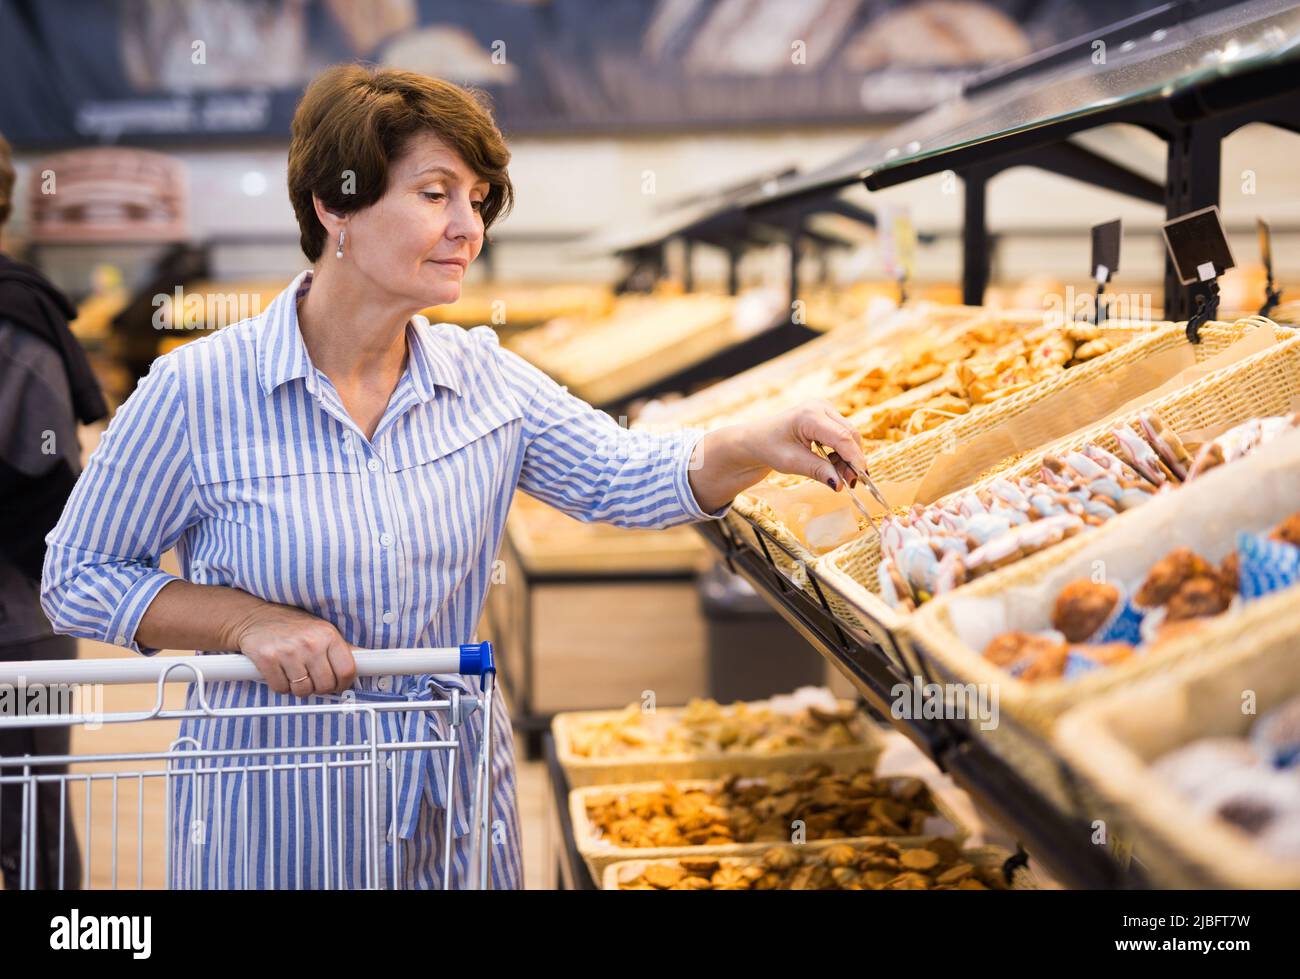 mature woman choosing bread and baking in grocery section of supermarket Stock Photo